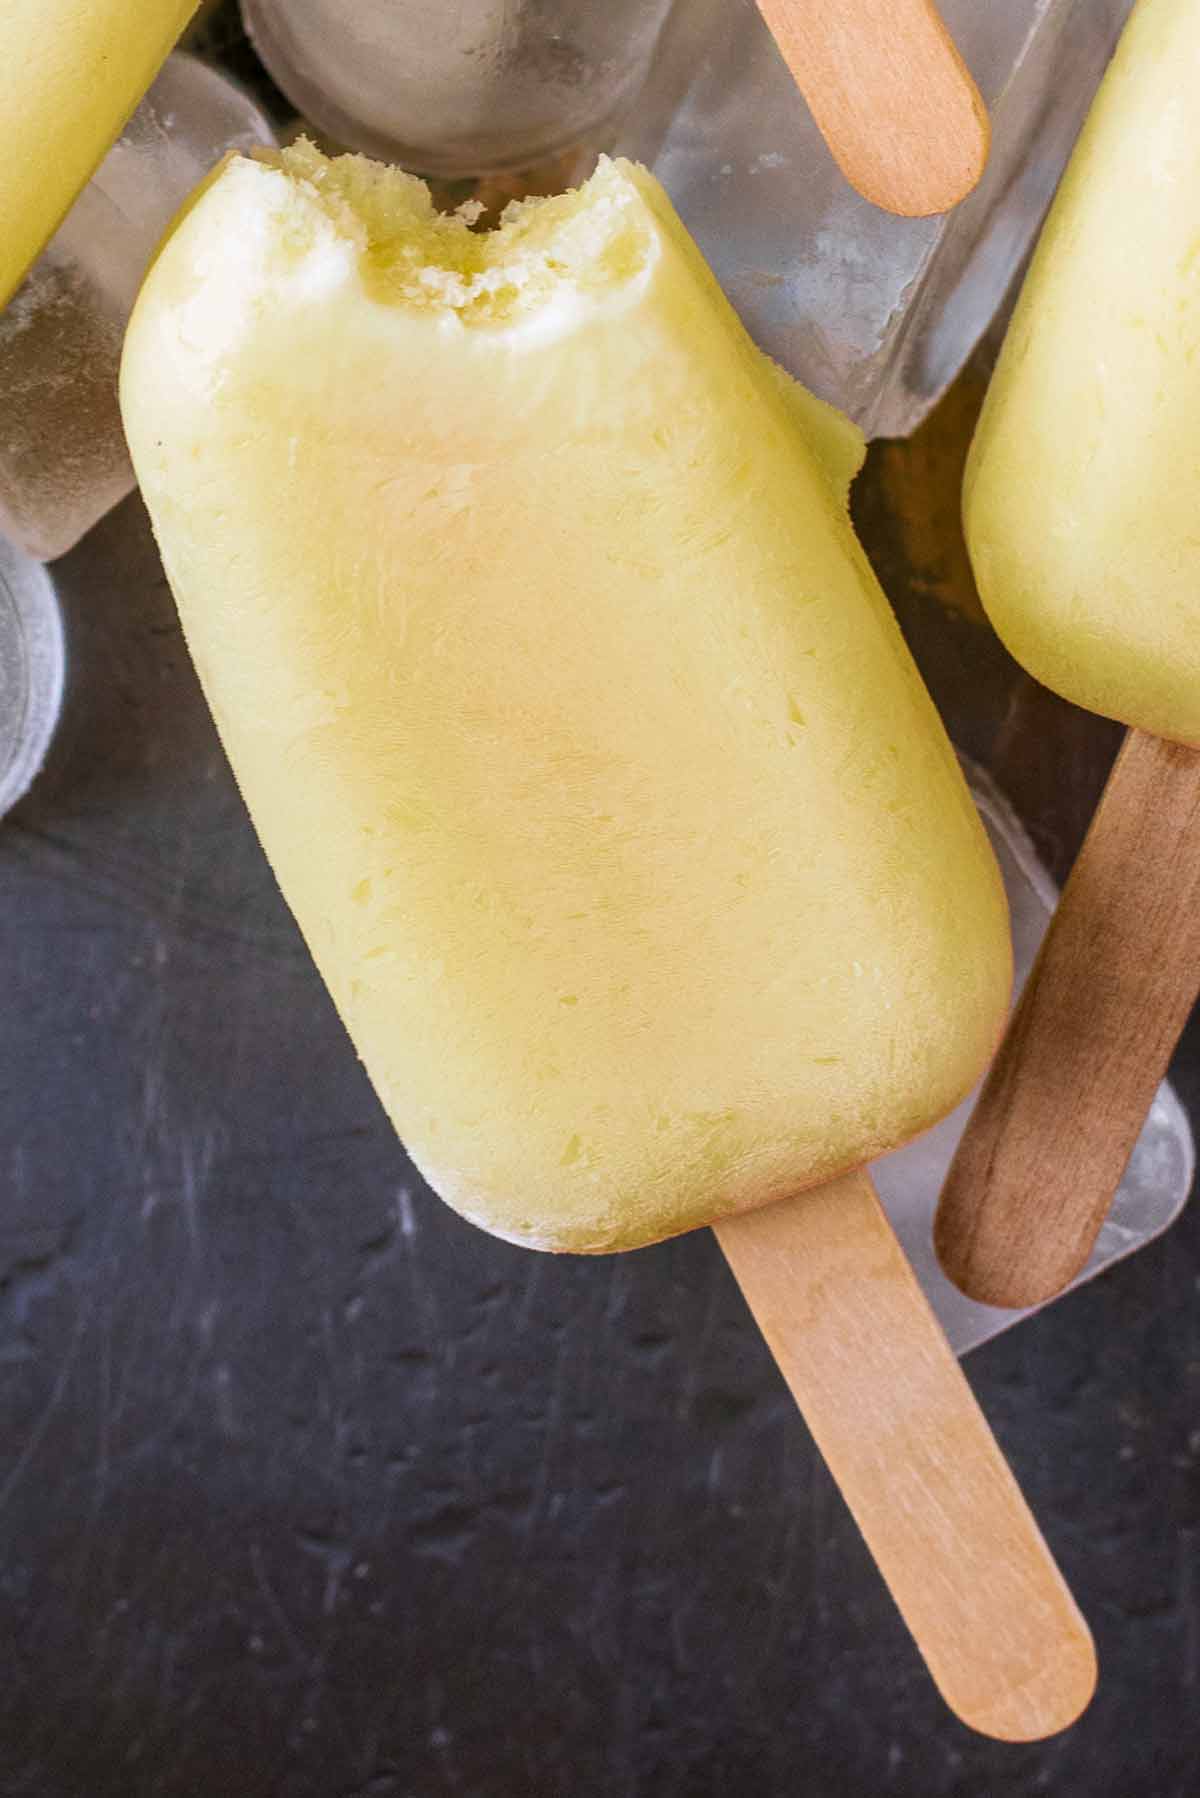 An ice lolly with a bite taken out of it.